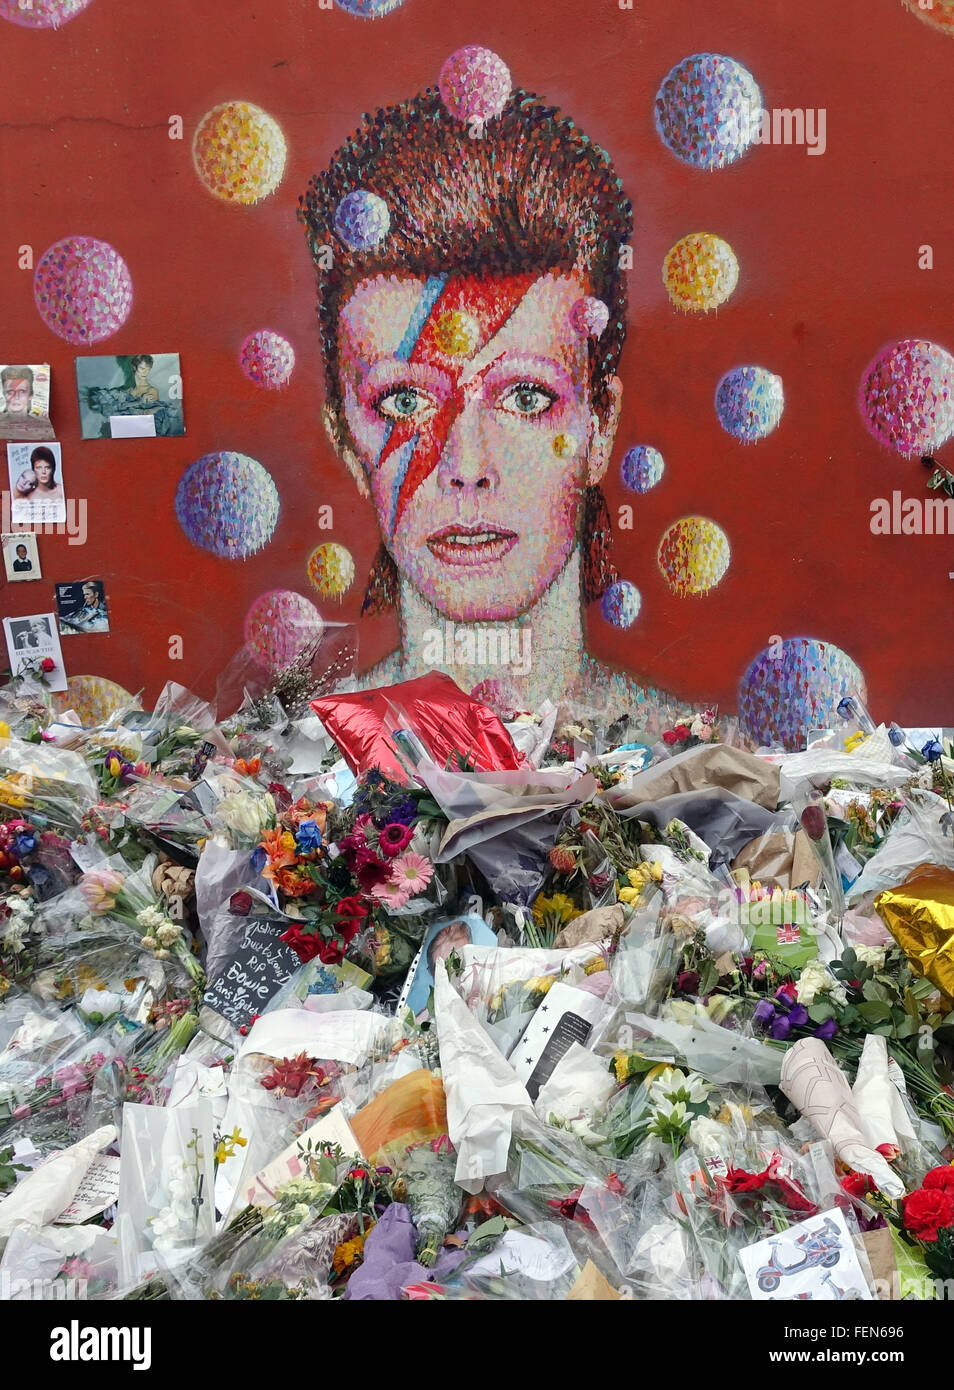 David Bowie graffito in Brixton, London has become a shrine since his death Stock Photo